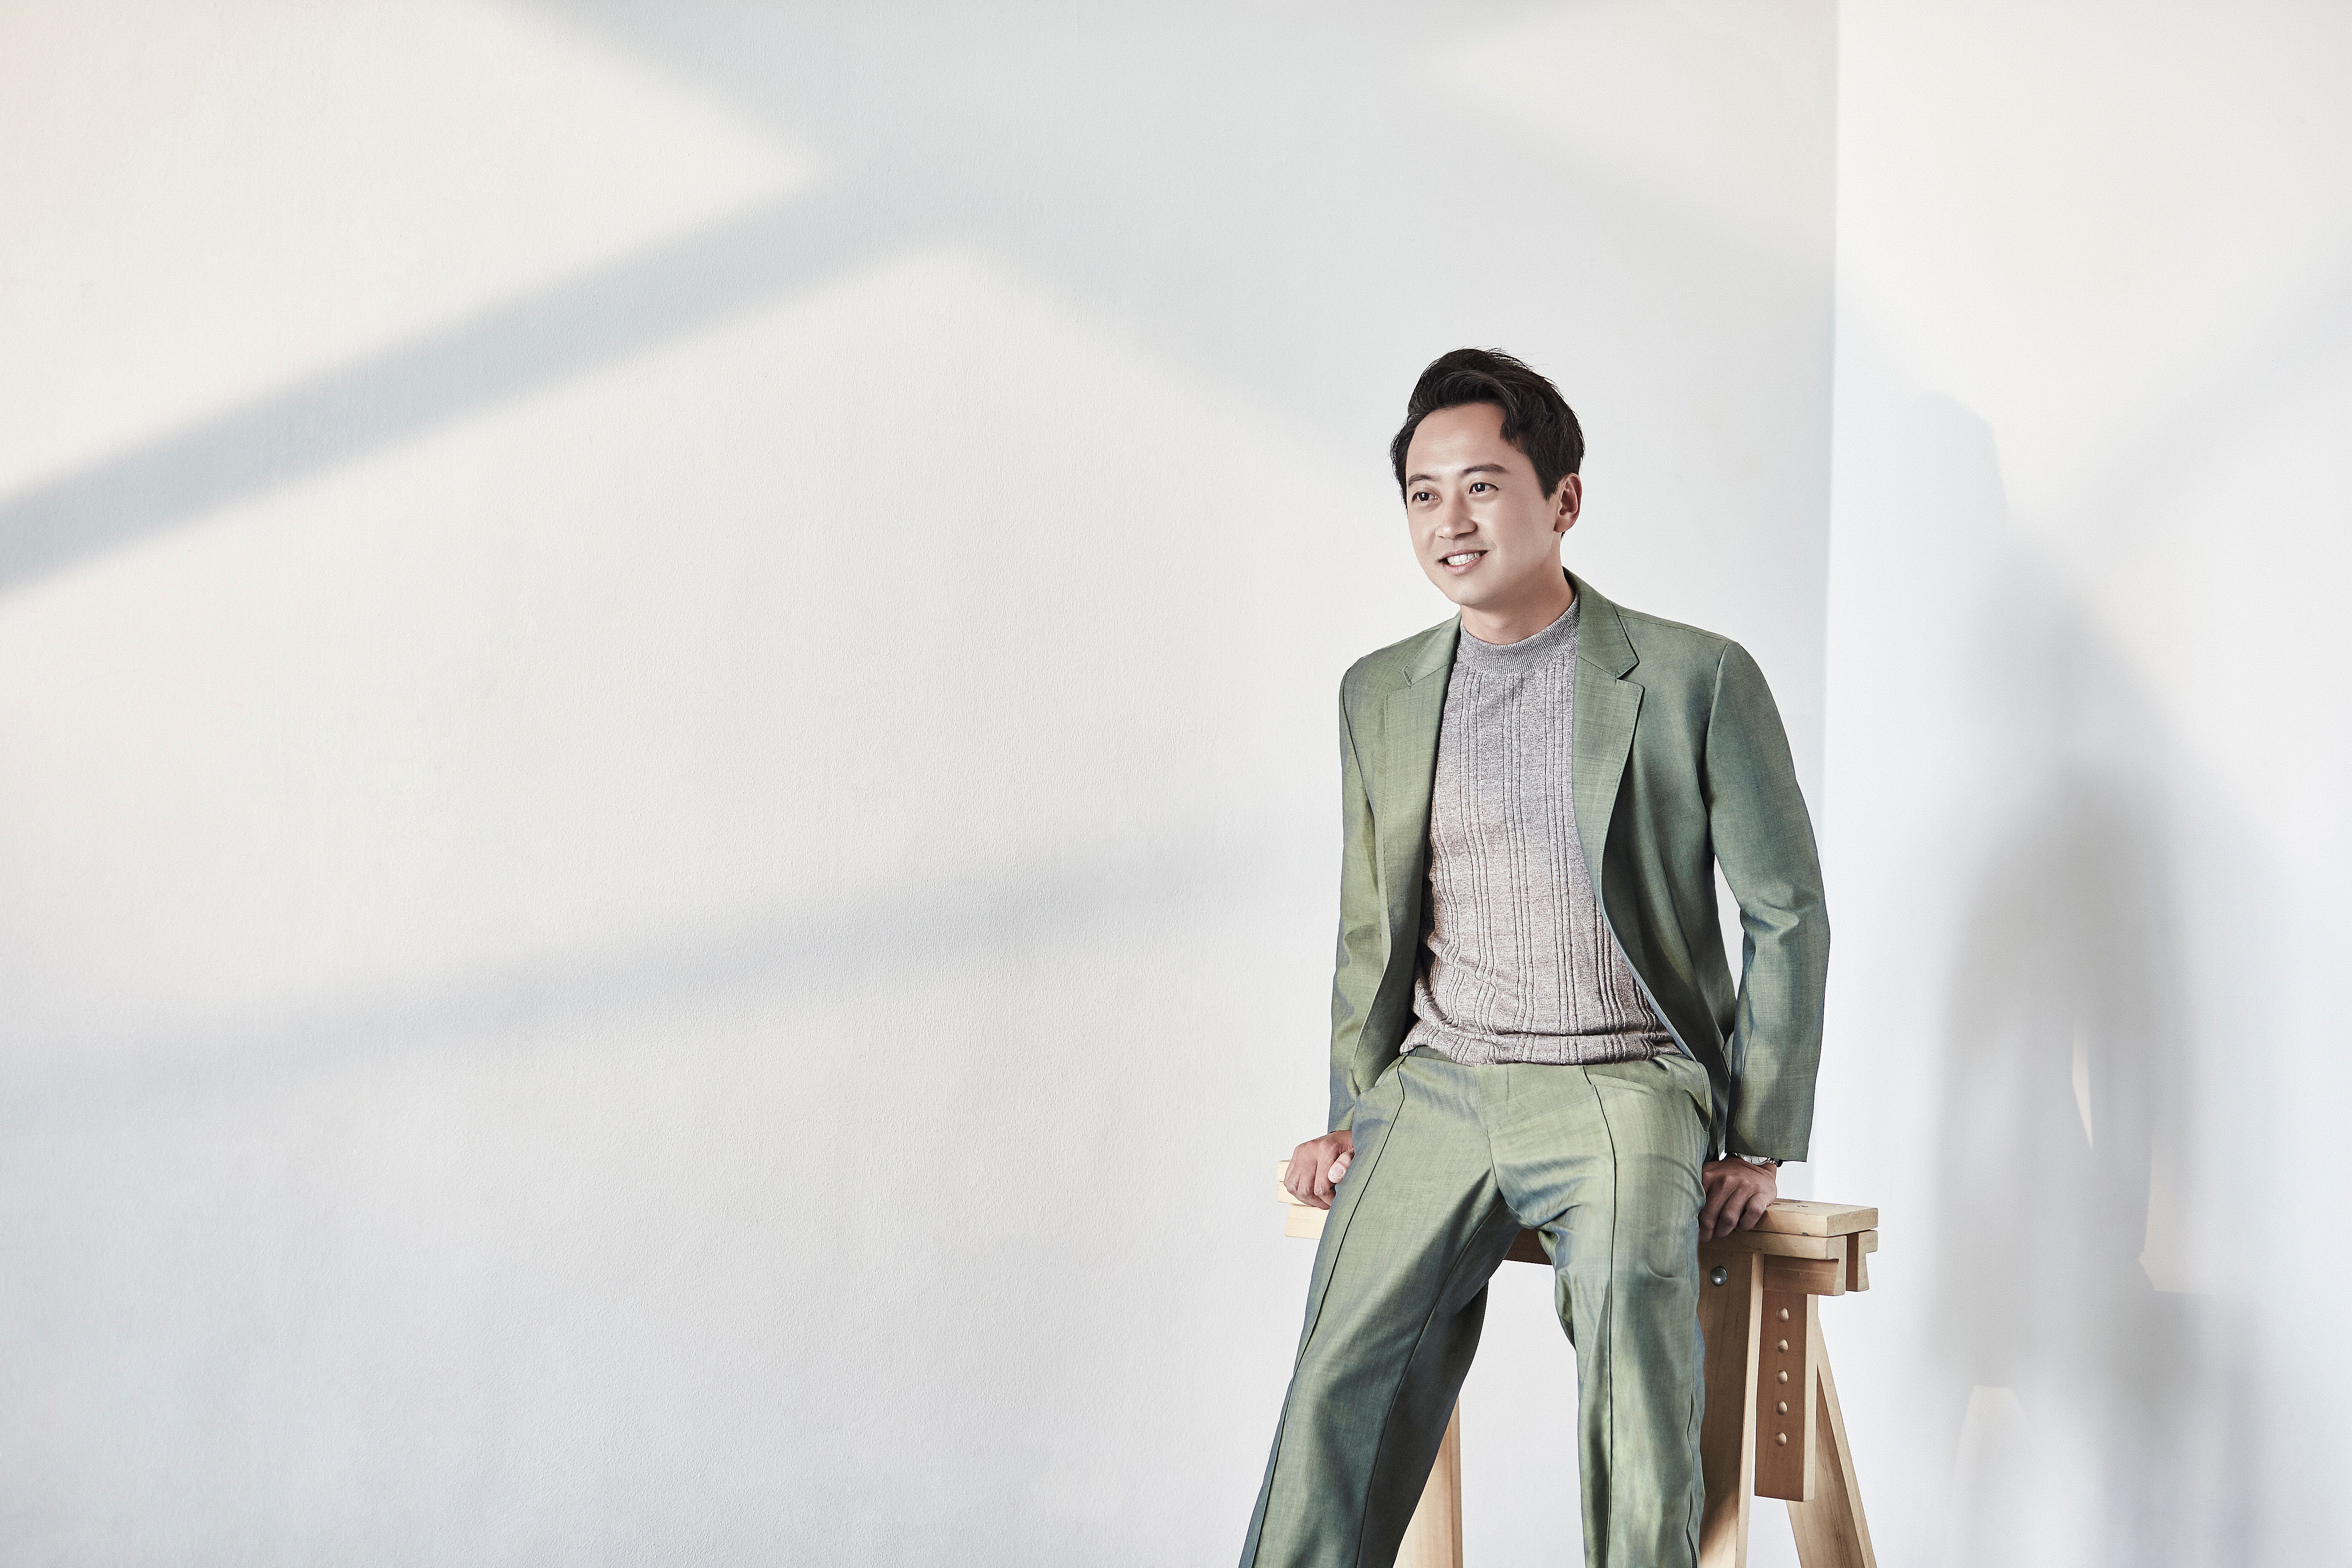 Andy Lim is wearing an olive green jacket with trousers and a crew neck sweater from Z Zegna.